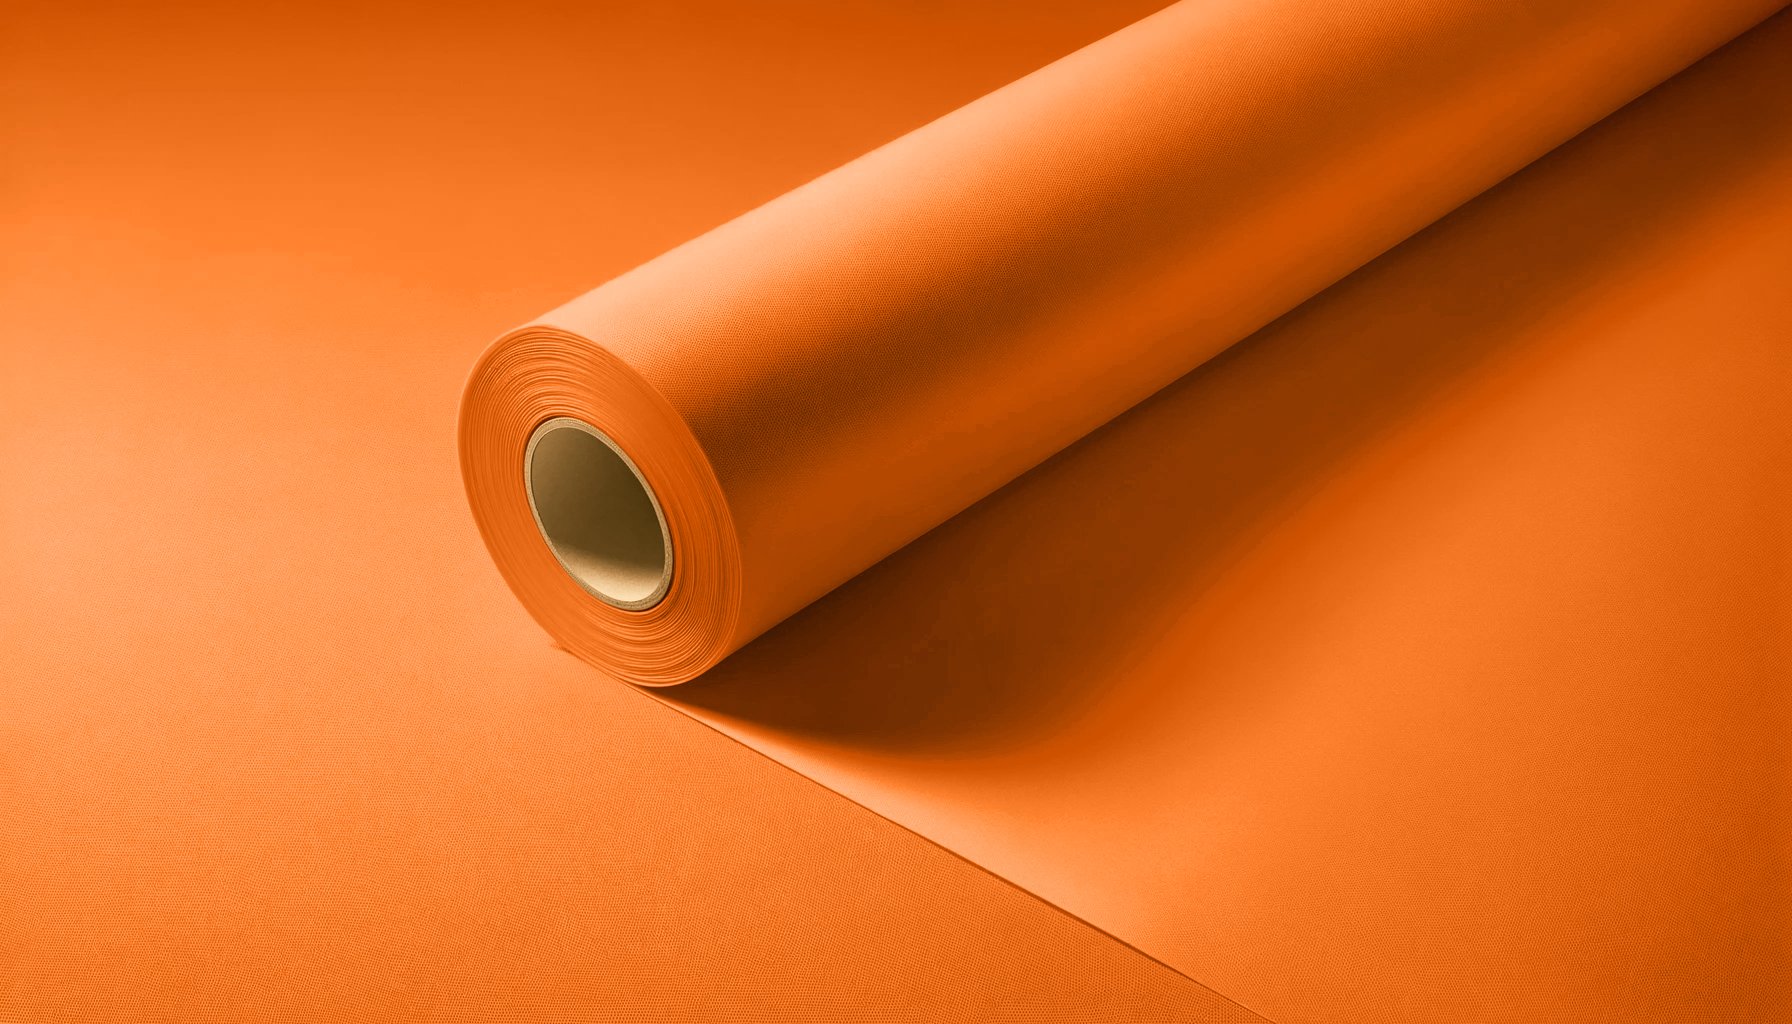 Peel & Stick Removable Re-usable Paint - Color RAL 2003 Pastel Orange - offRAL™ - RALRAW LLC, USA